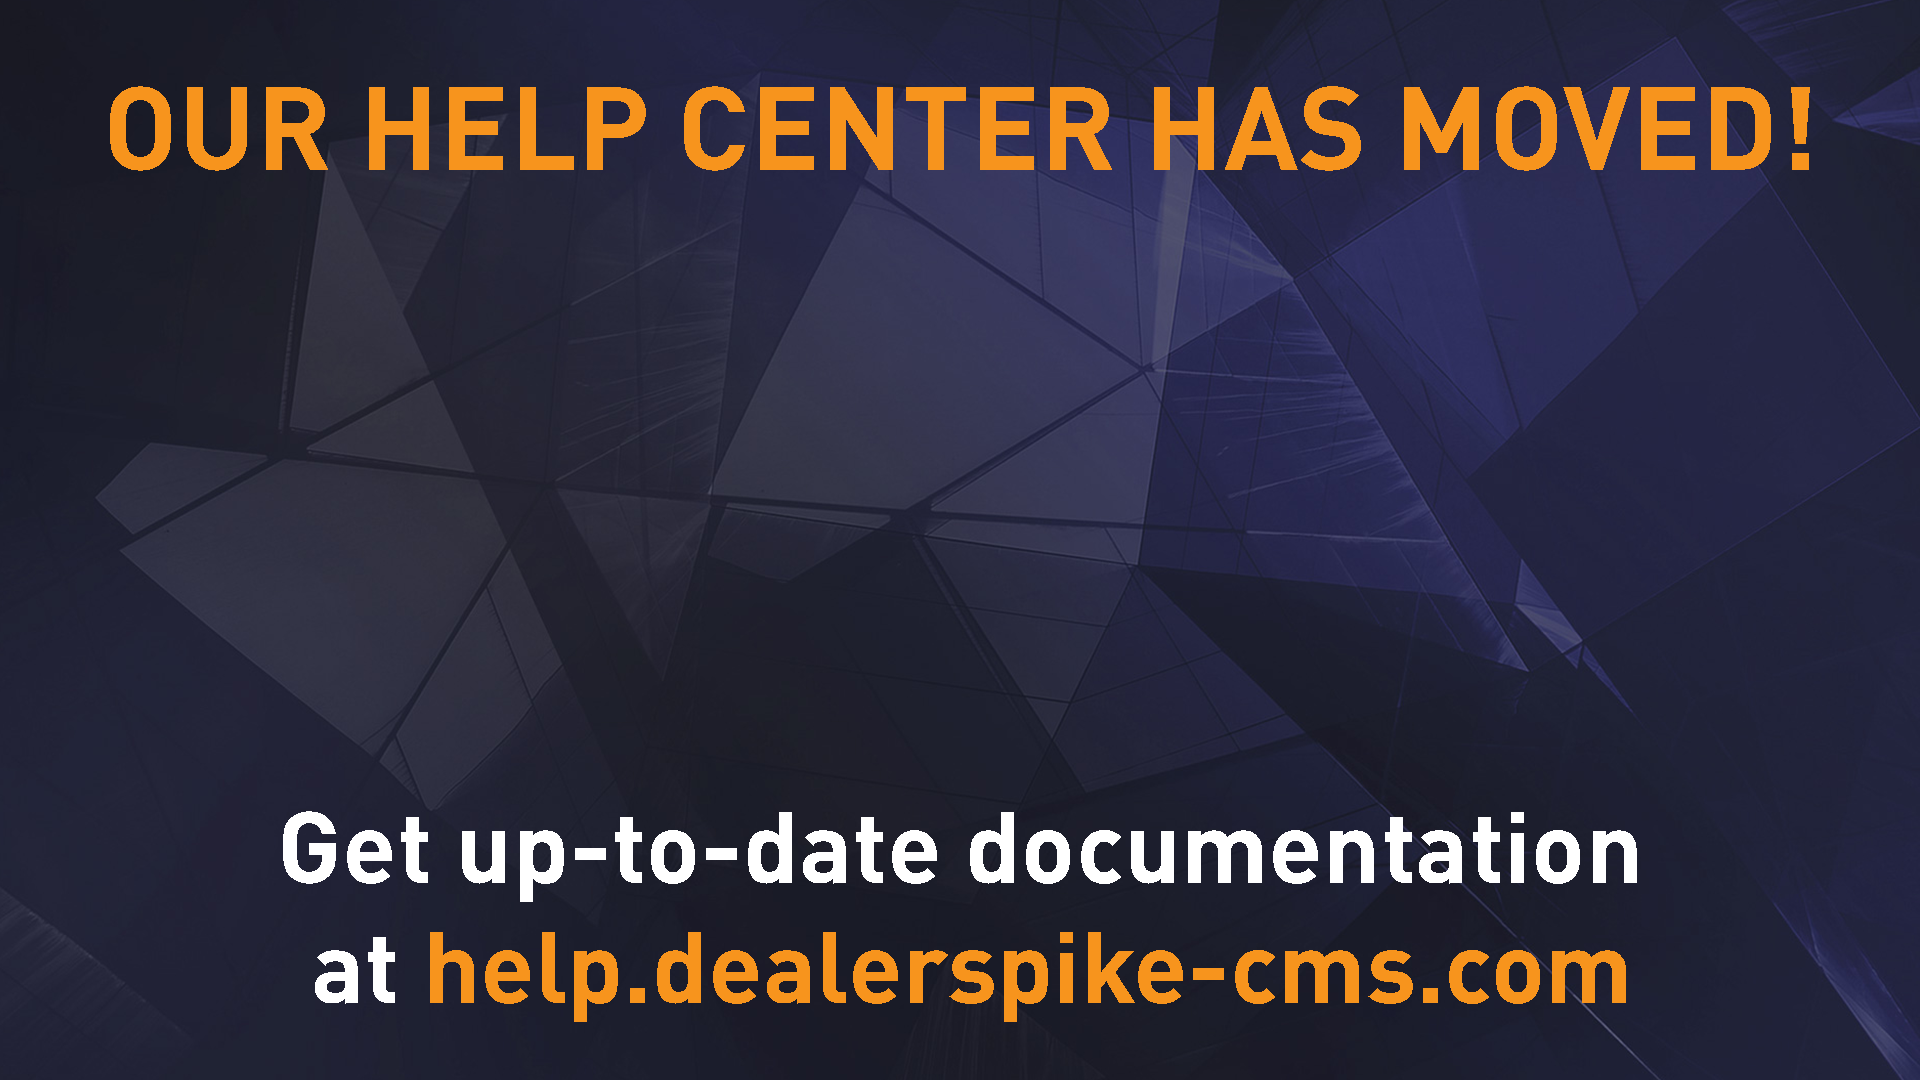 Our help center has moved to help.dealerspike-cms.com